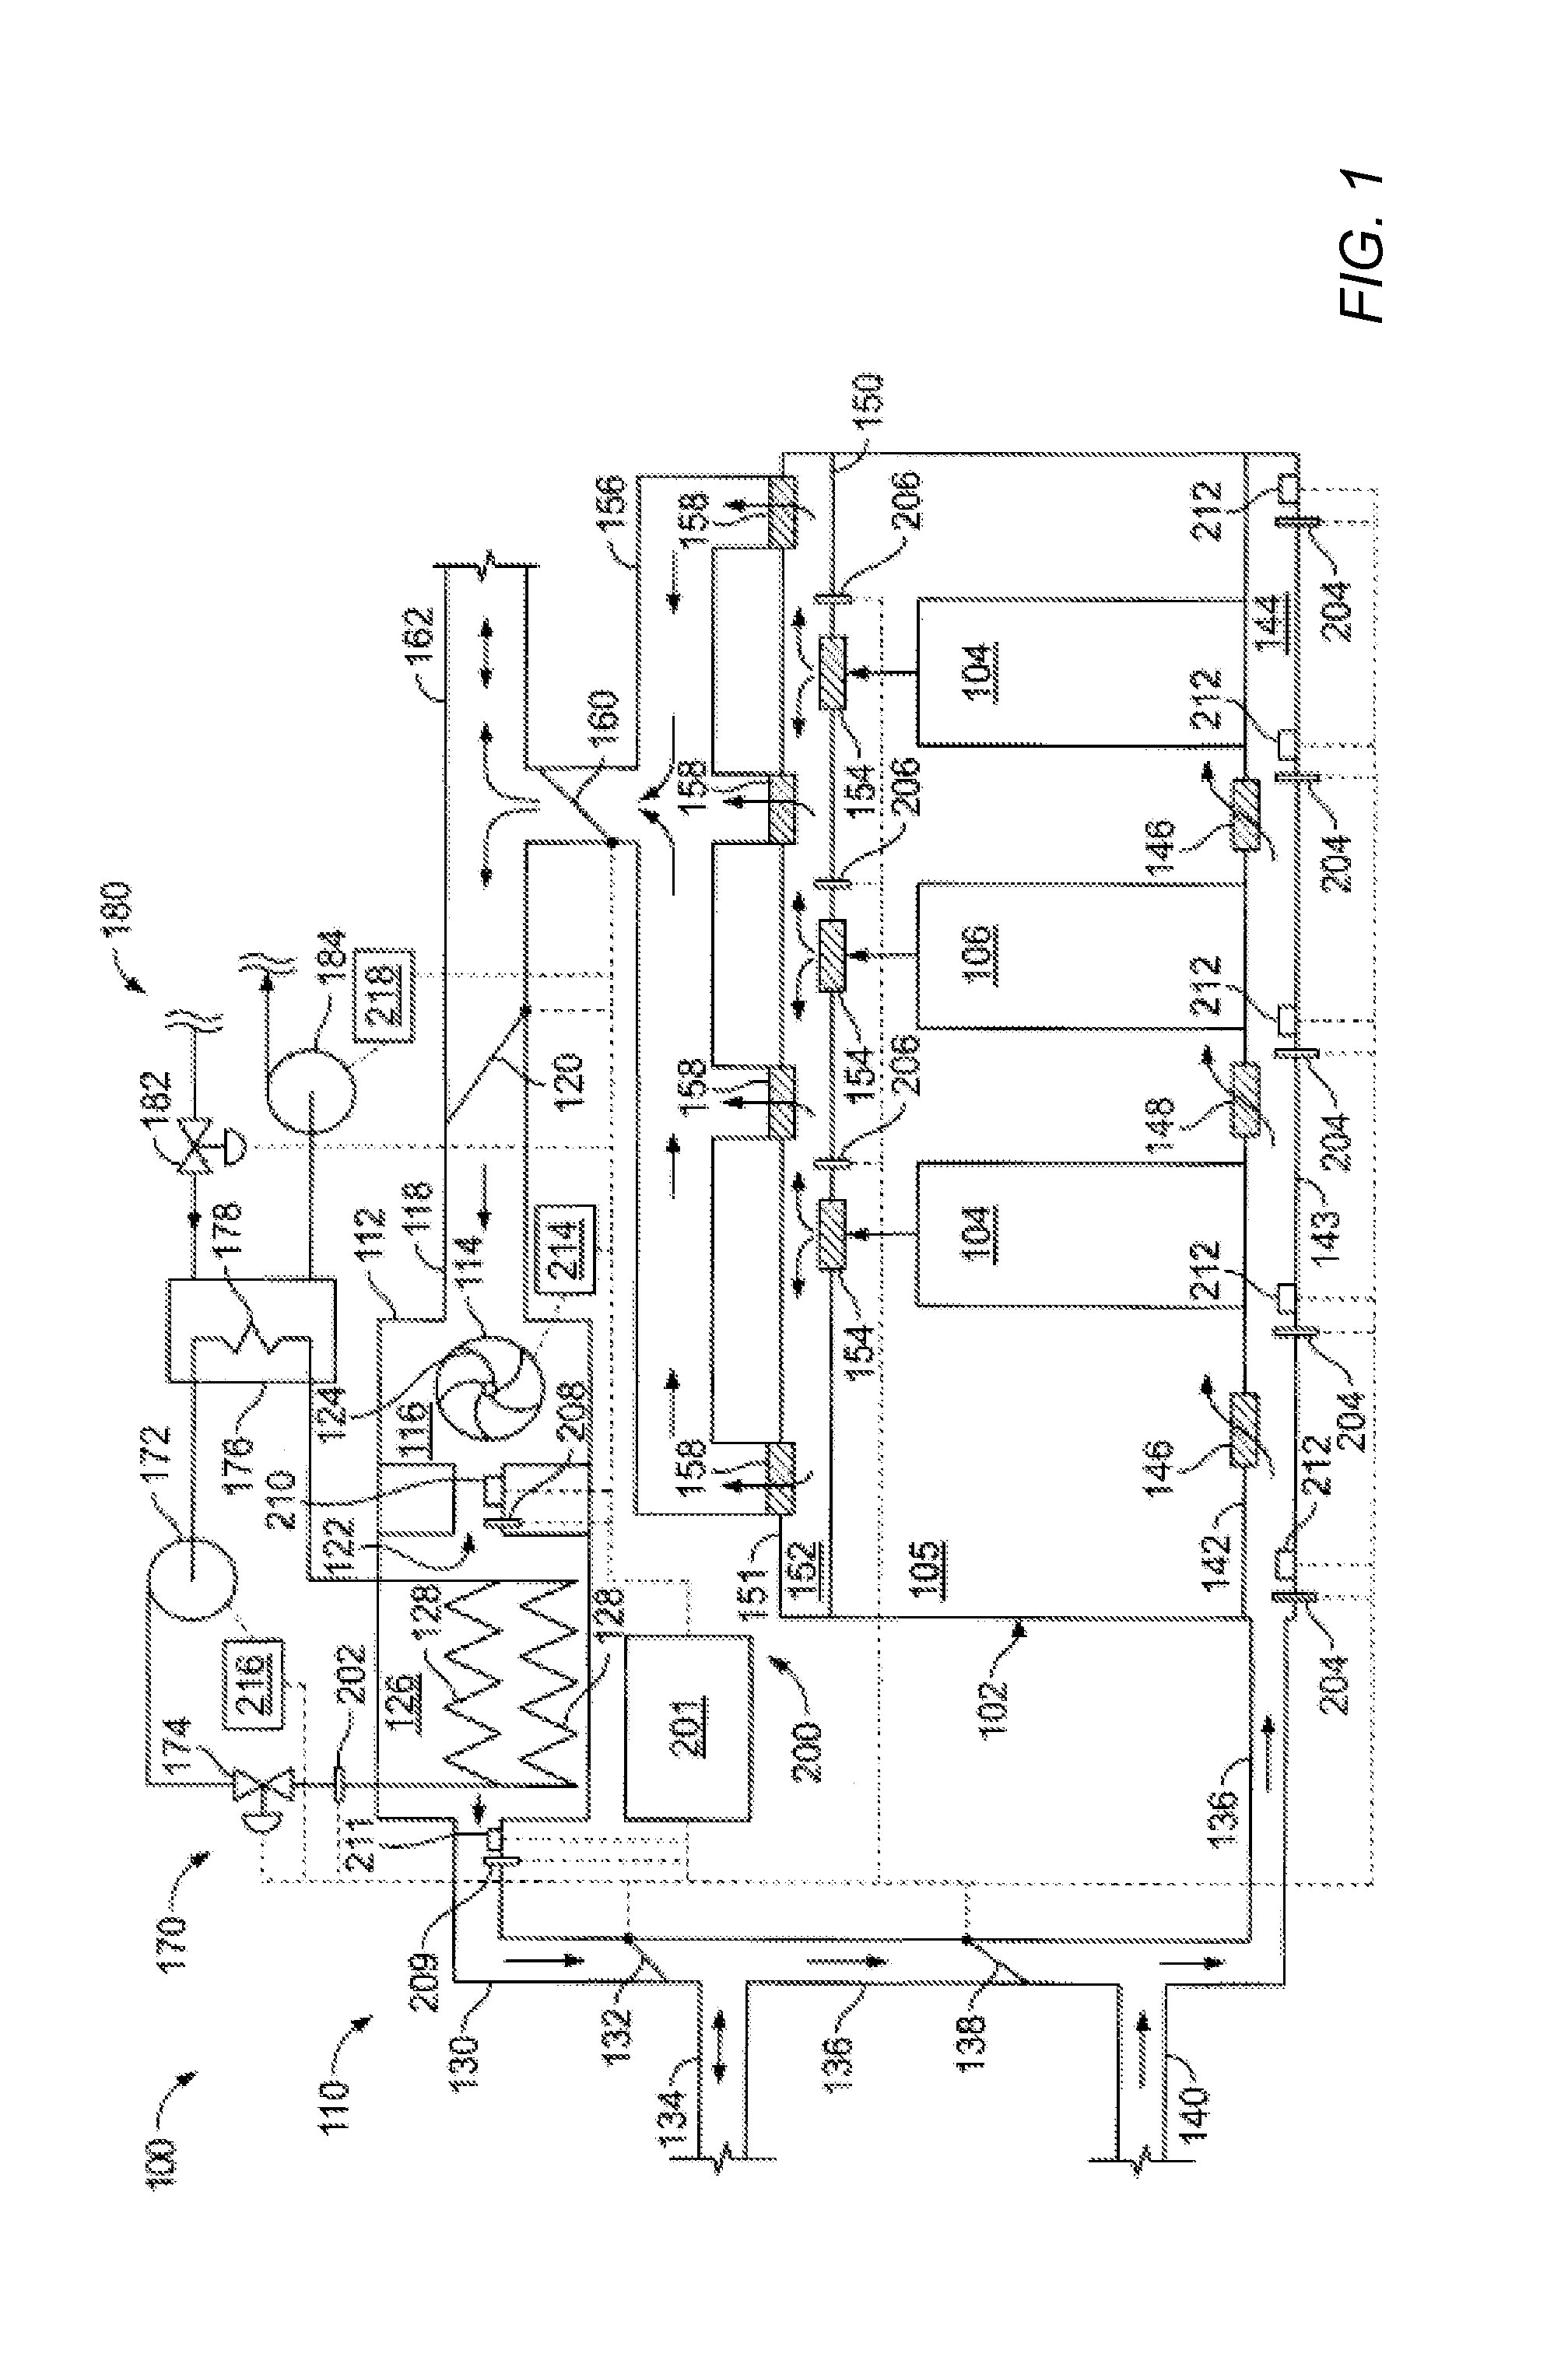 Airflow control system with external air control